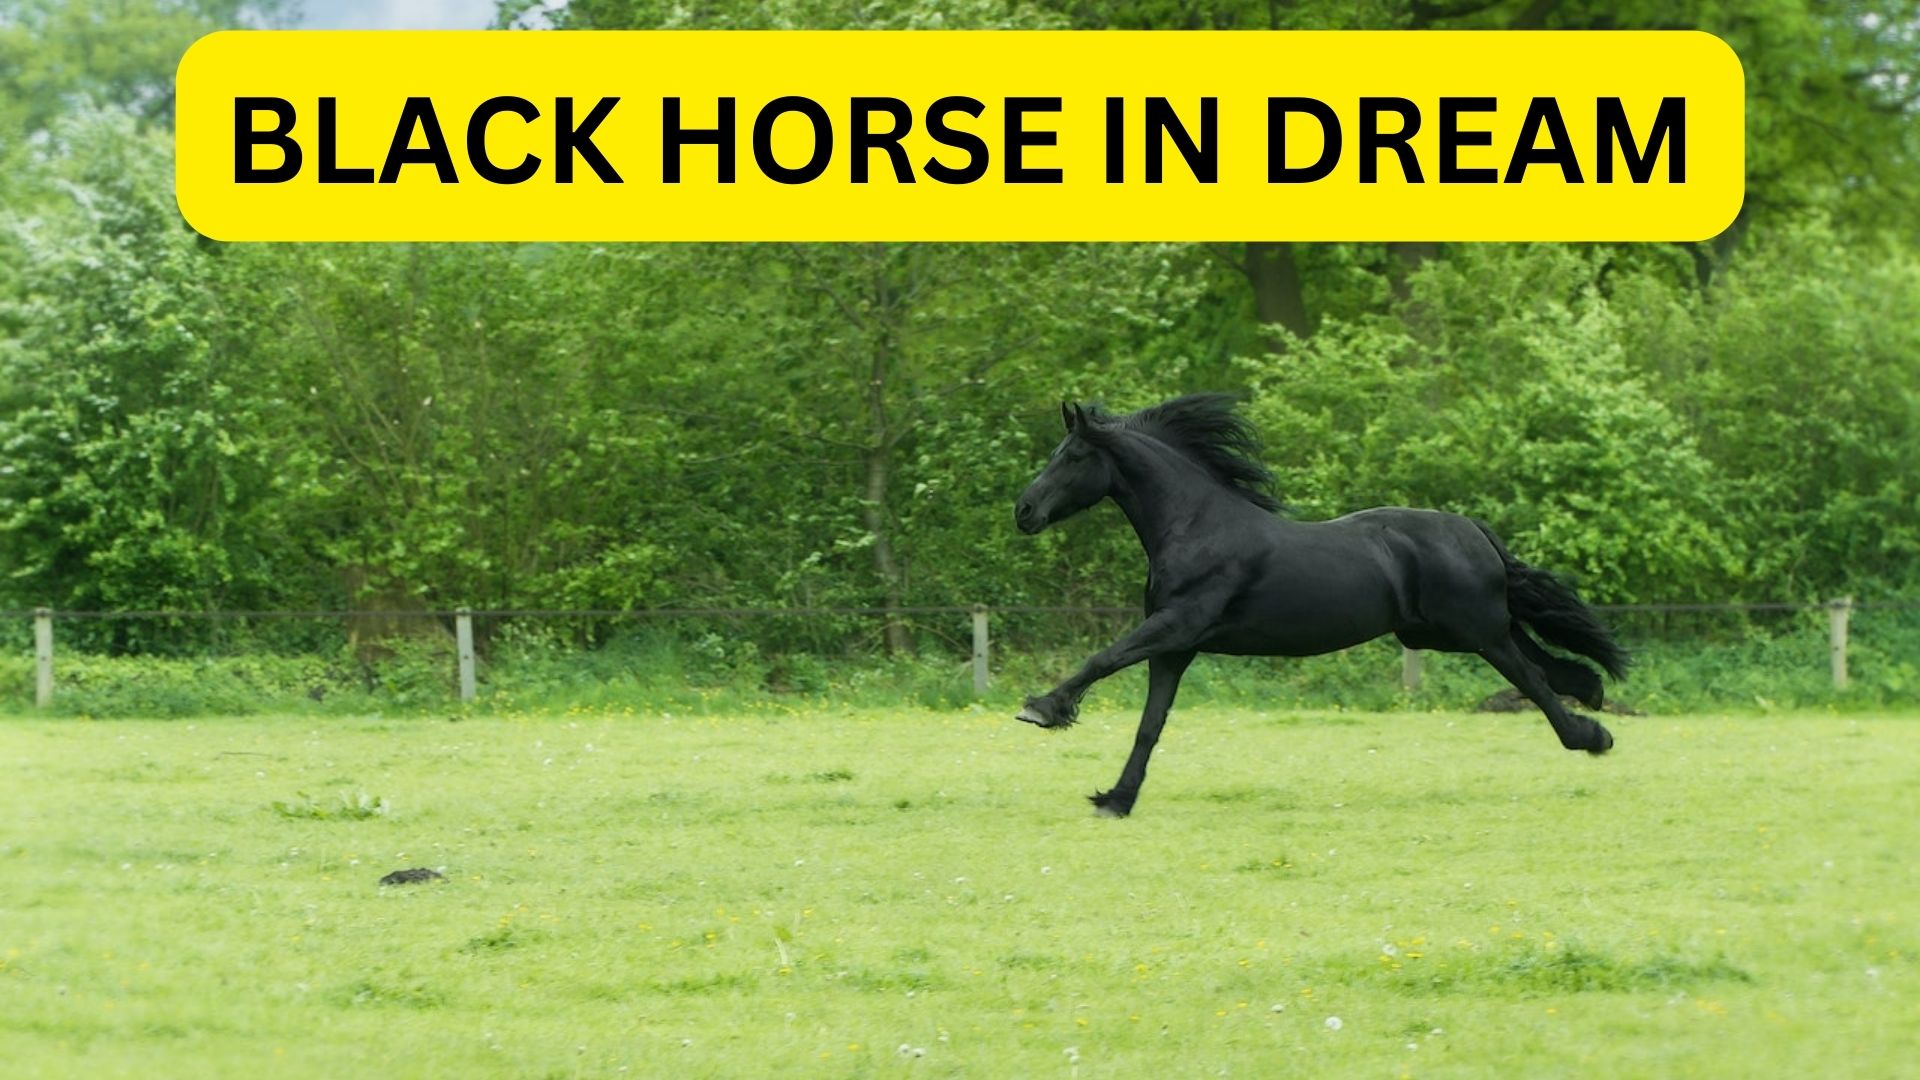 Black Horse In Dream - A Sign Of Clarity Or Self Awakening